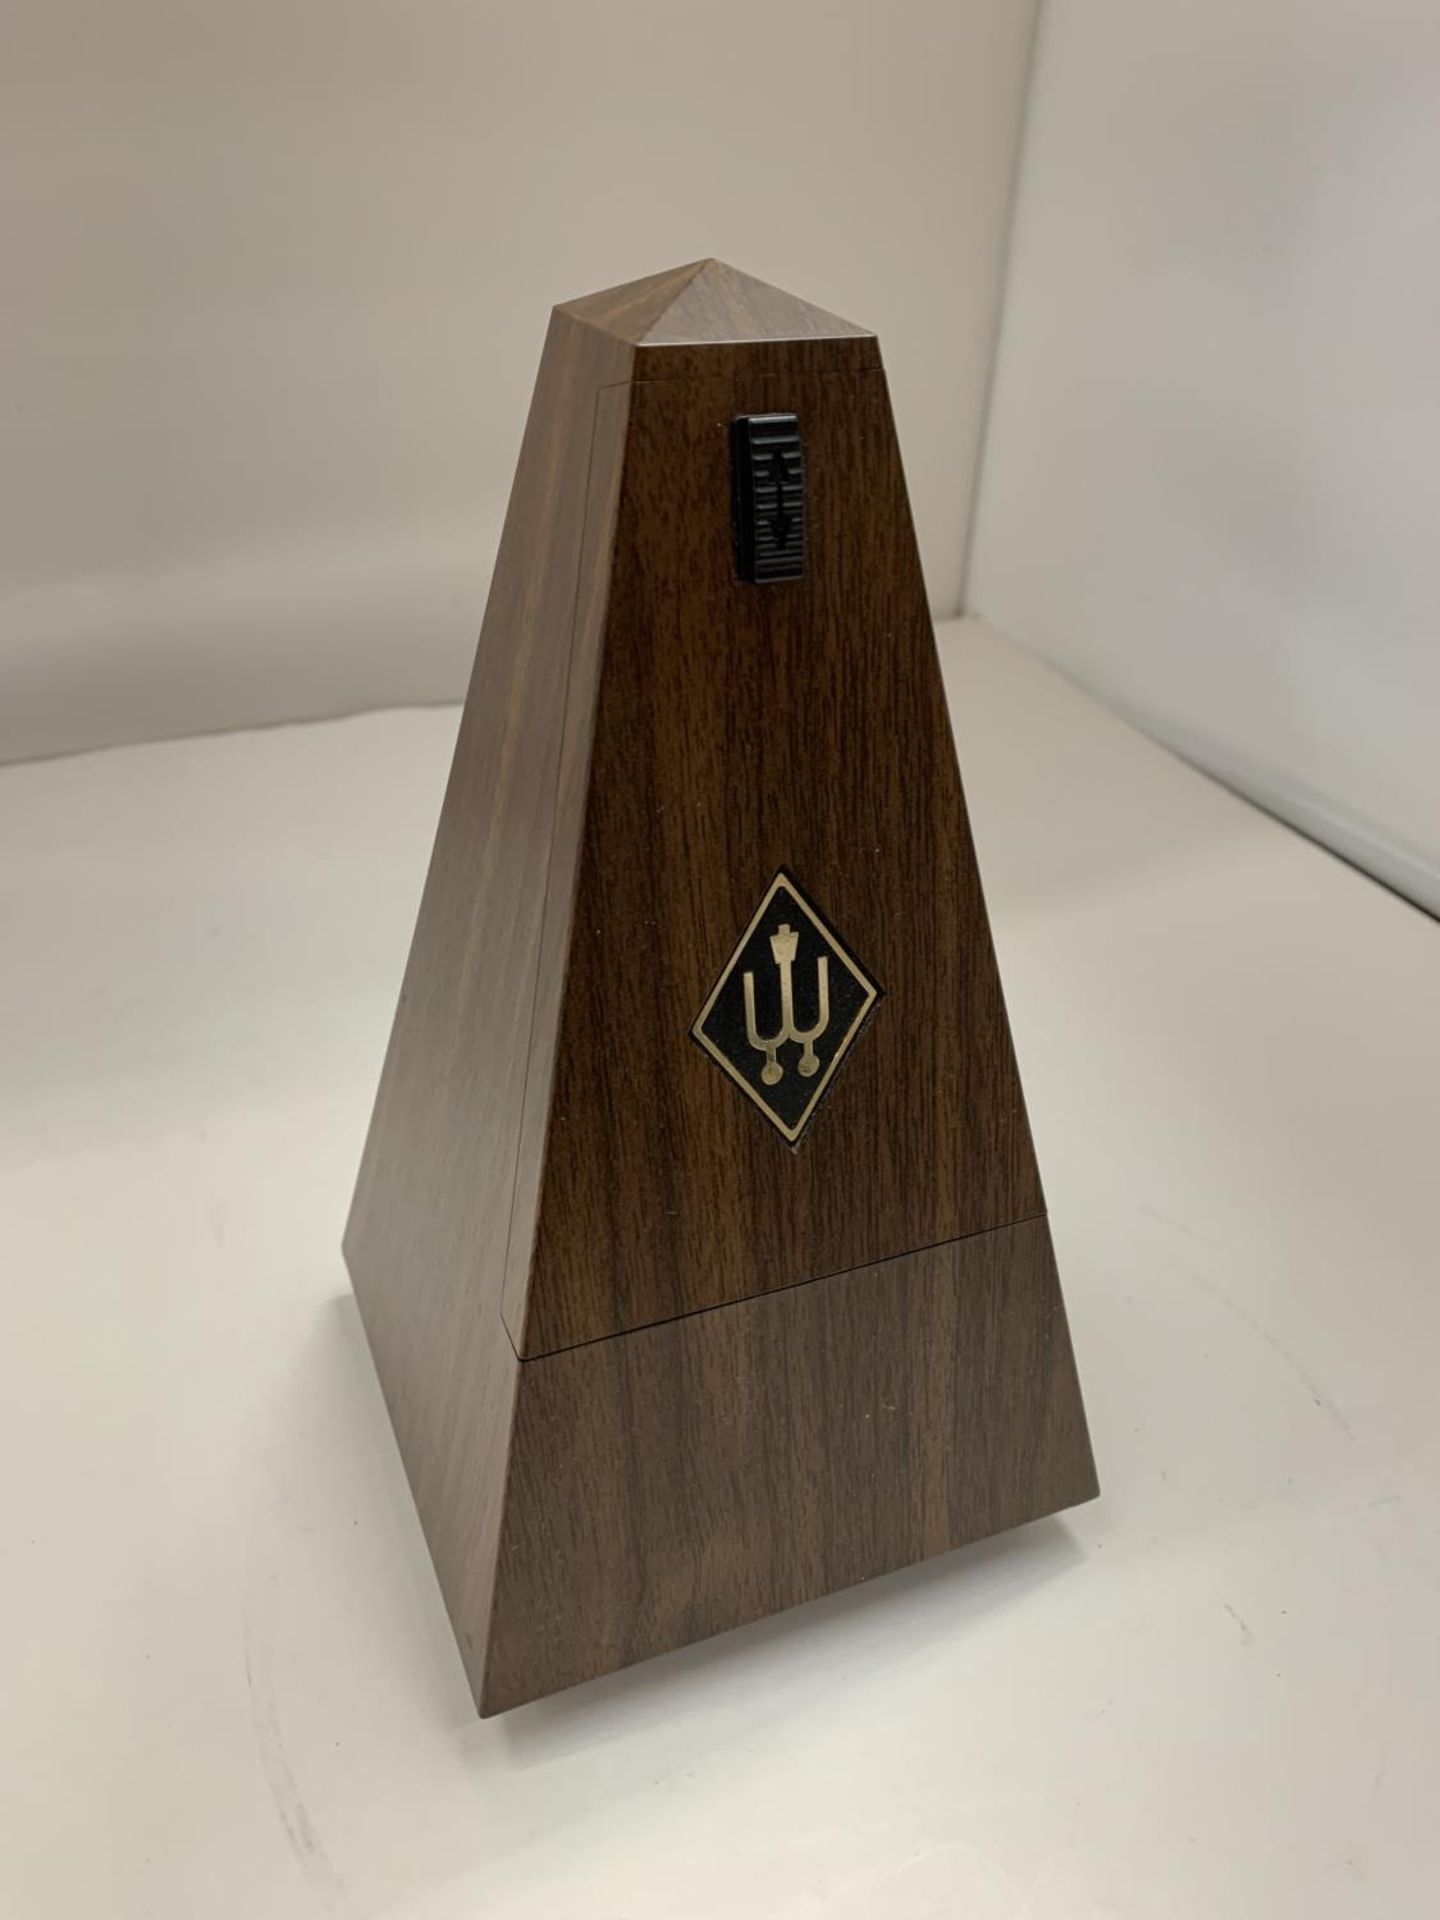 A WITTNER METRONOME